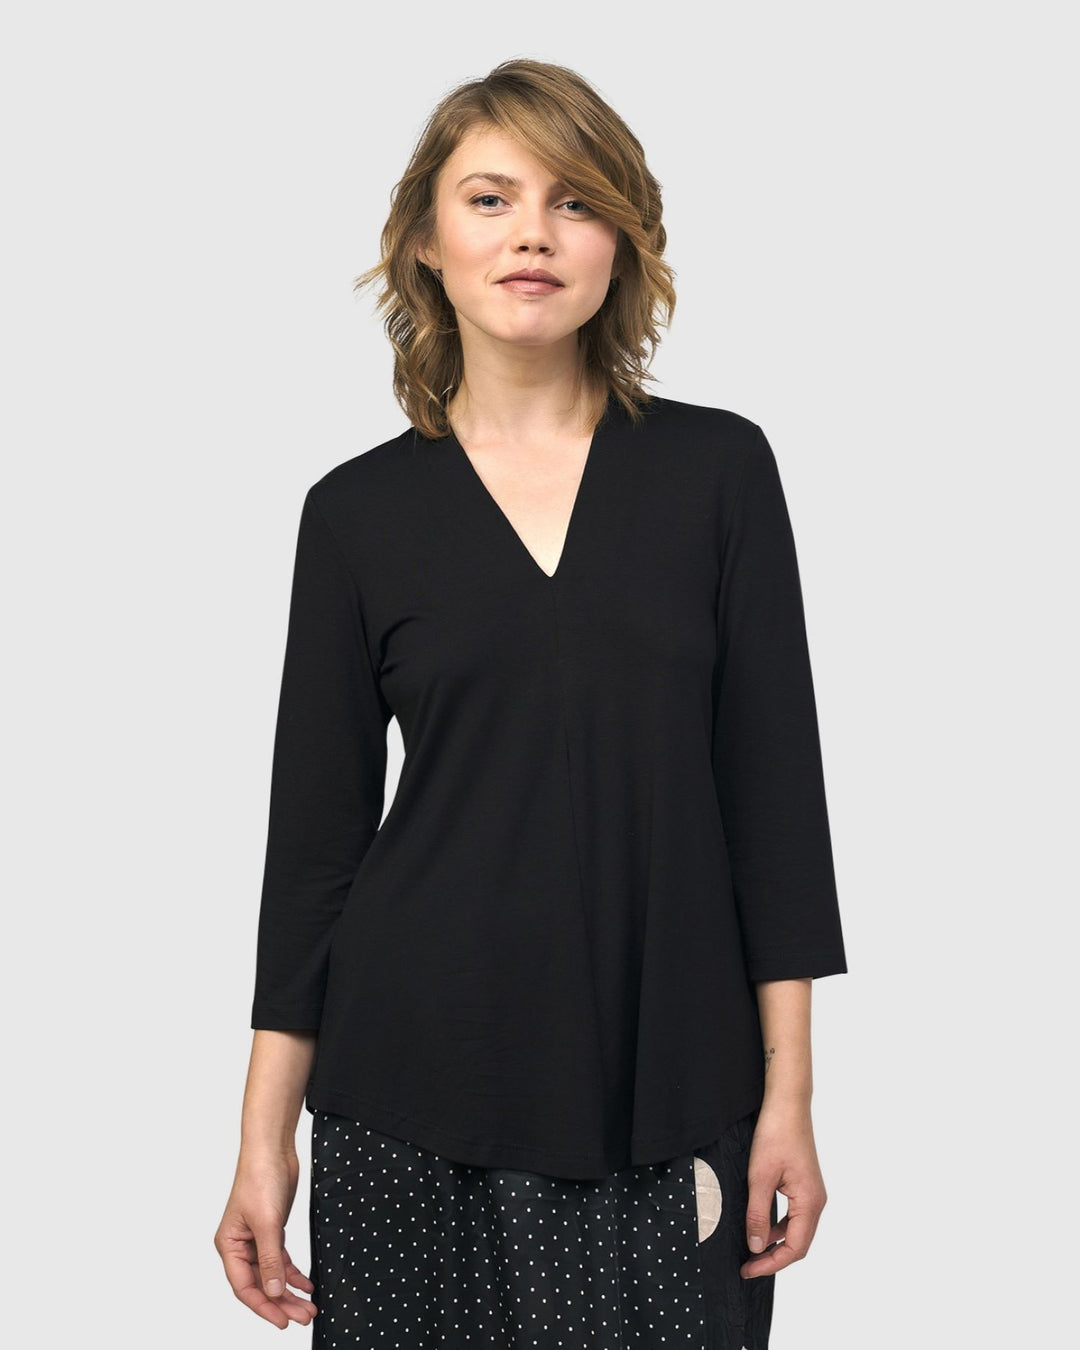 Tops for Women over 50 - Tunic, Trapeze, Dolman & More